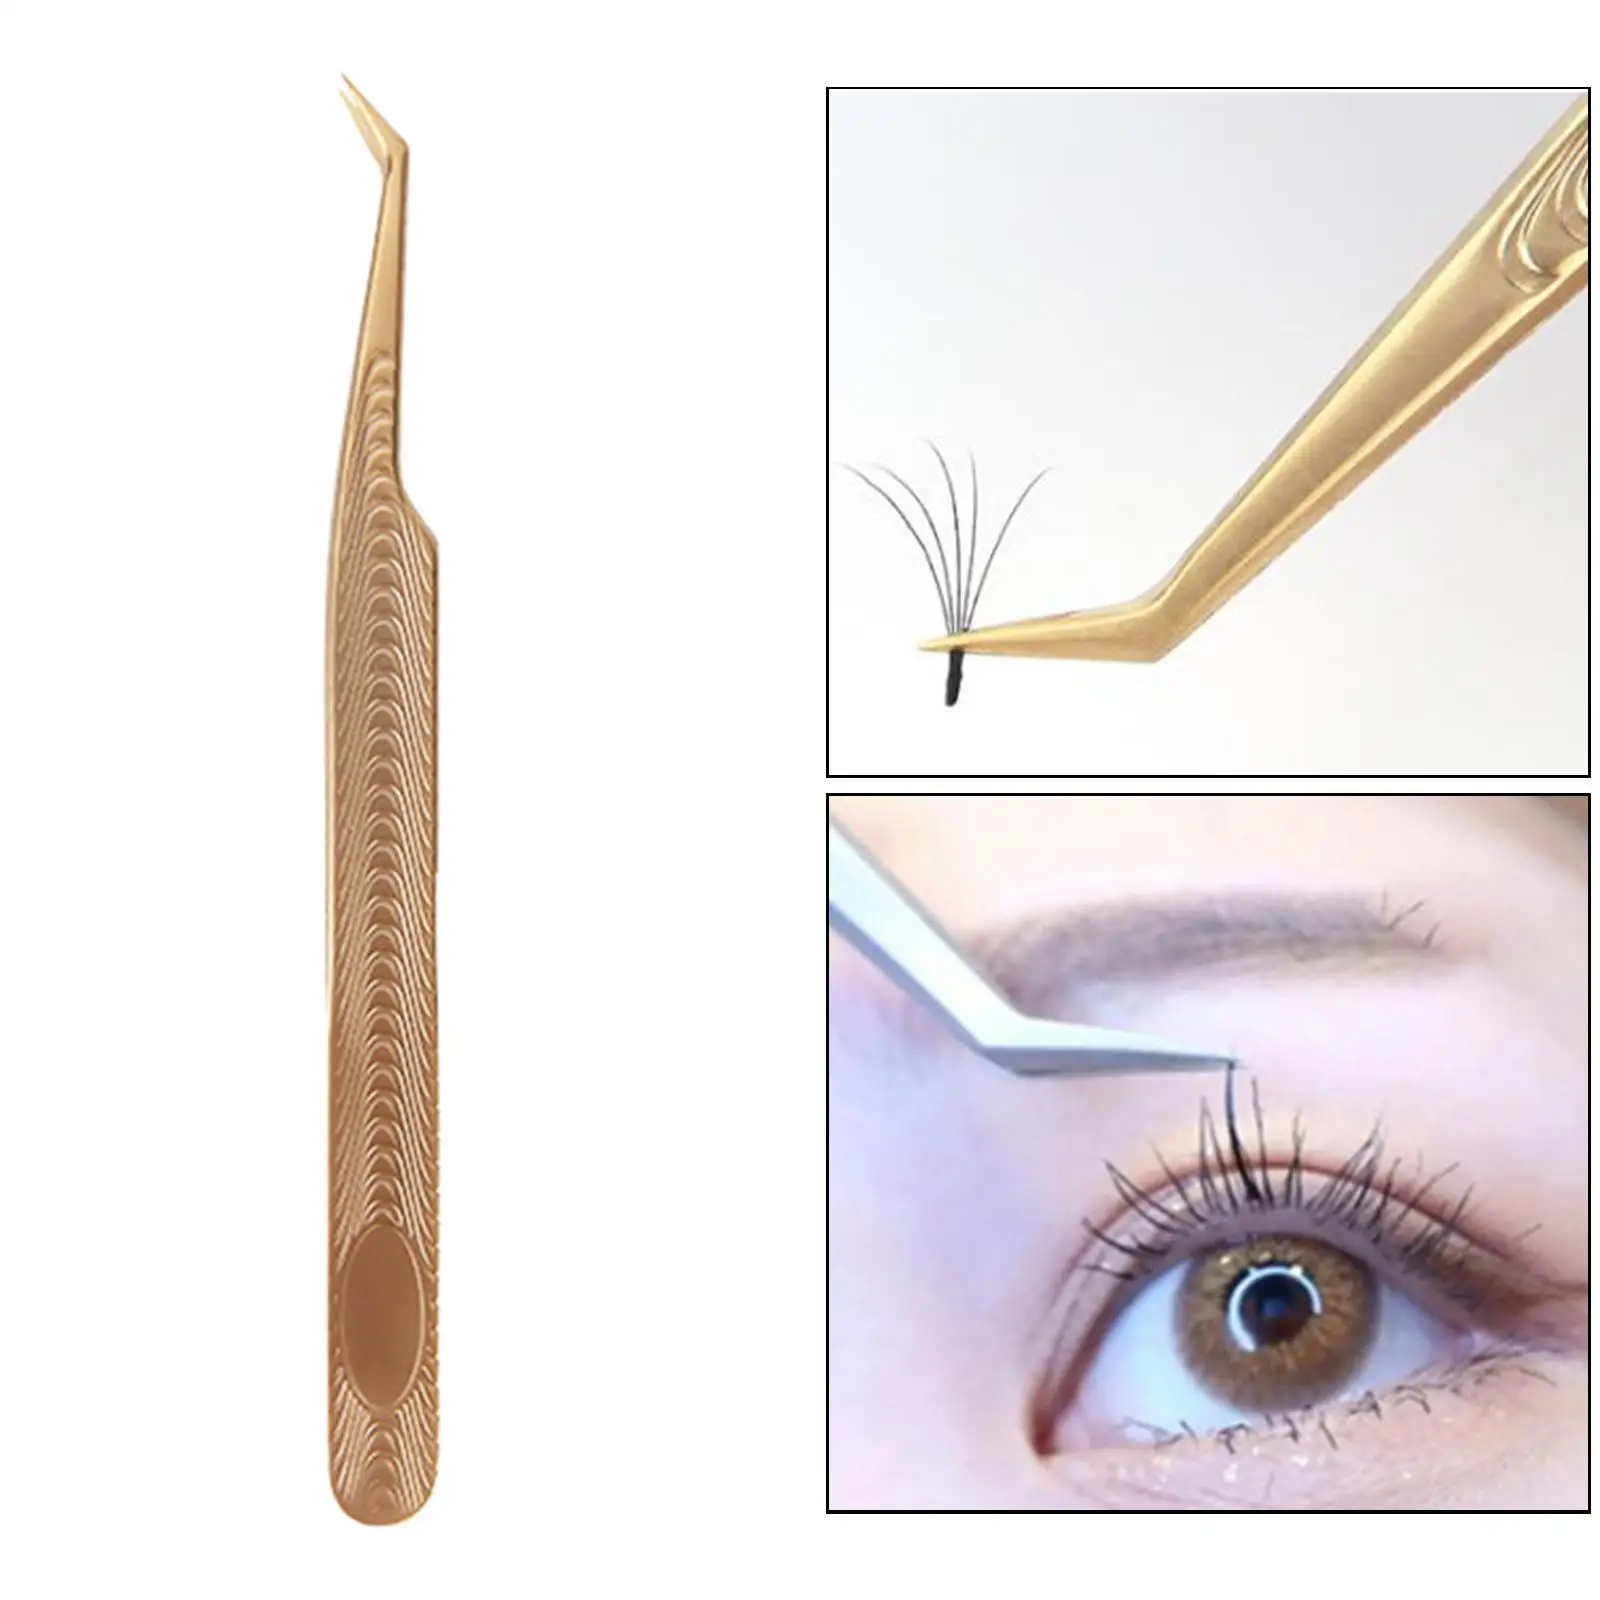 Stainless Steel Eyelash Tweezers Eyelash Applicator Tool Straight and Curved Tip for Volume Isolation Lashes Lash Extension